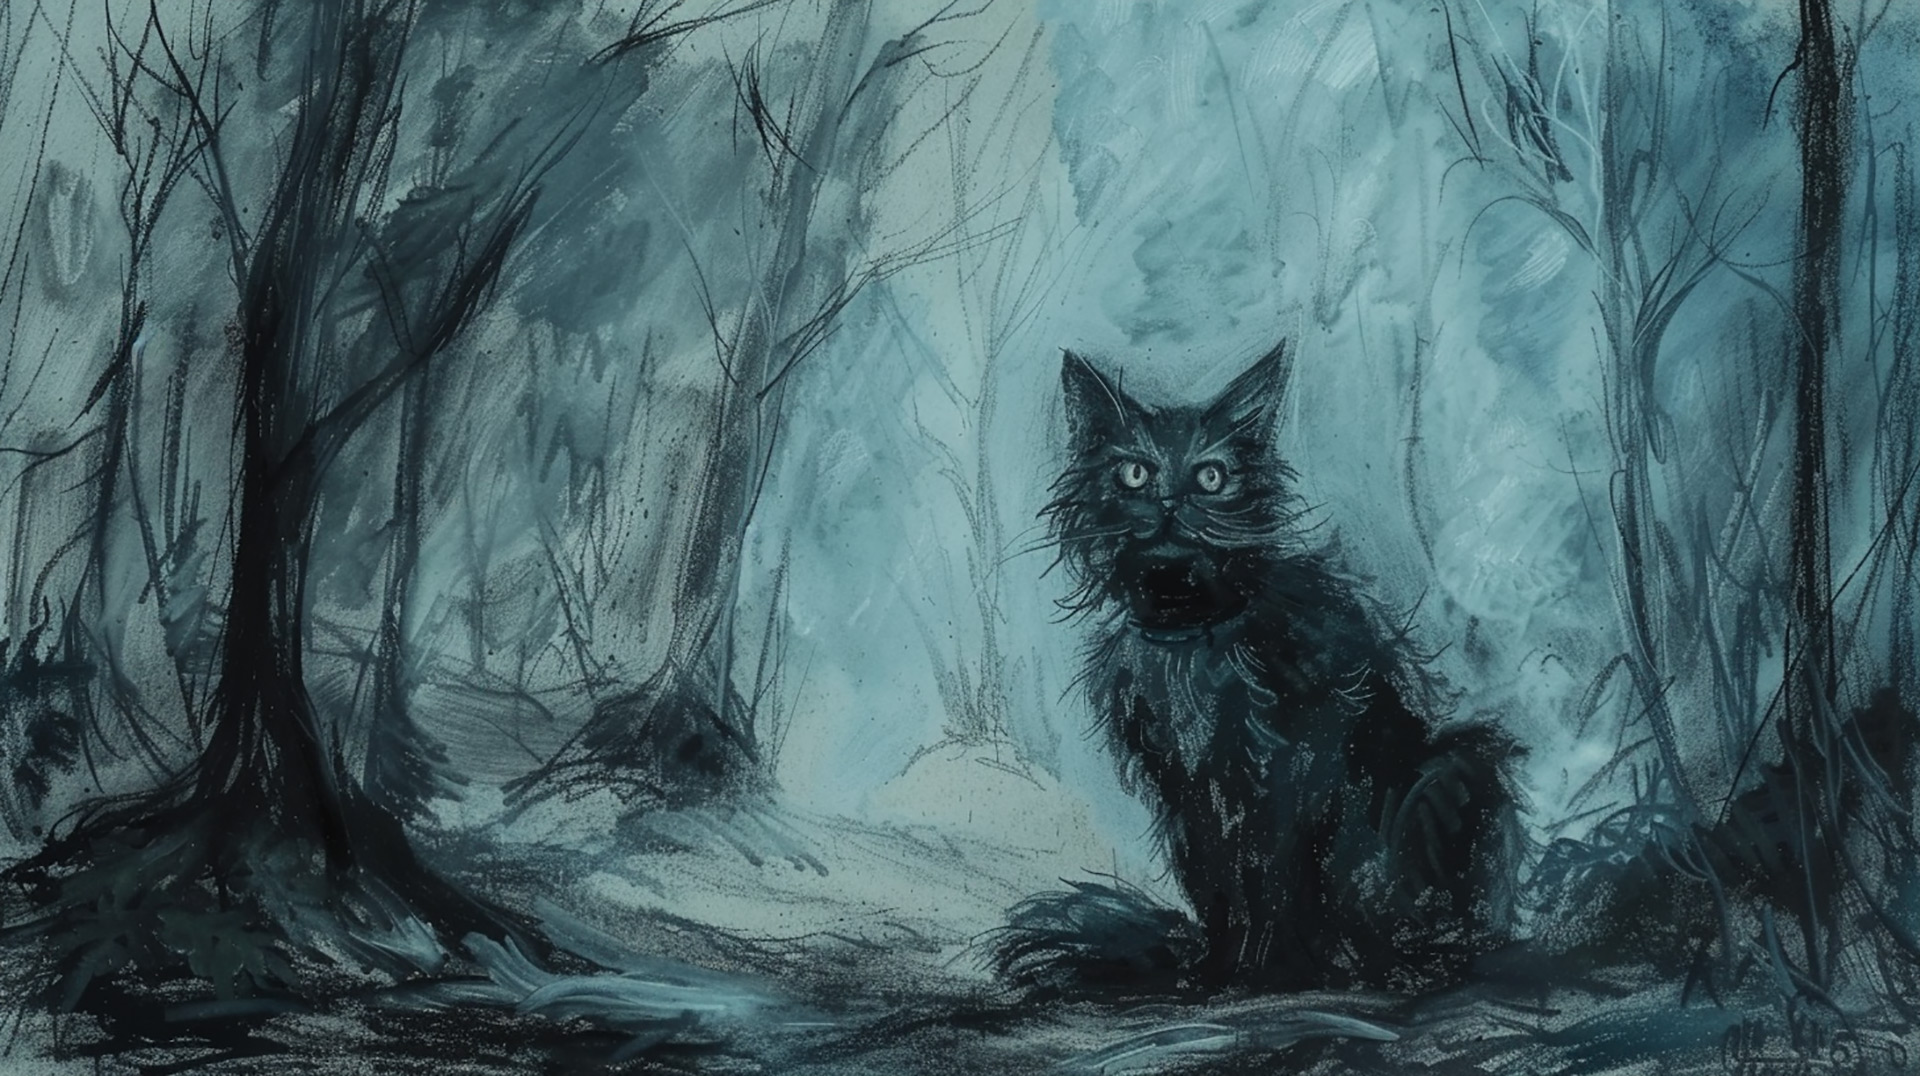 Uncover the Charm: Minimalist Grey Cat Art in a Haunted Forest